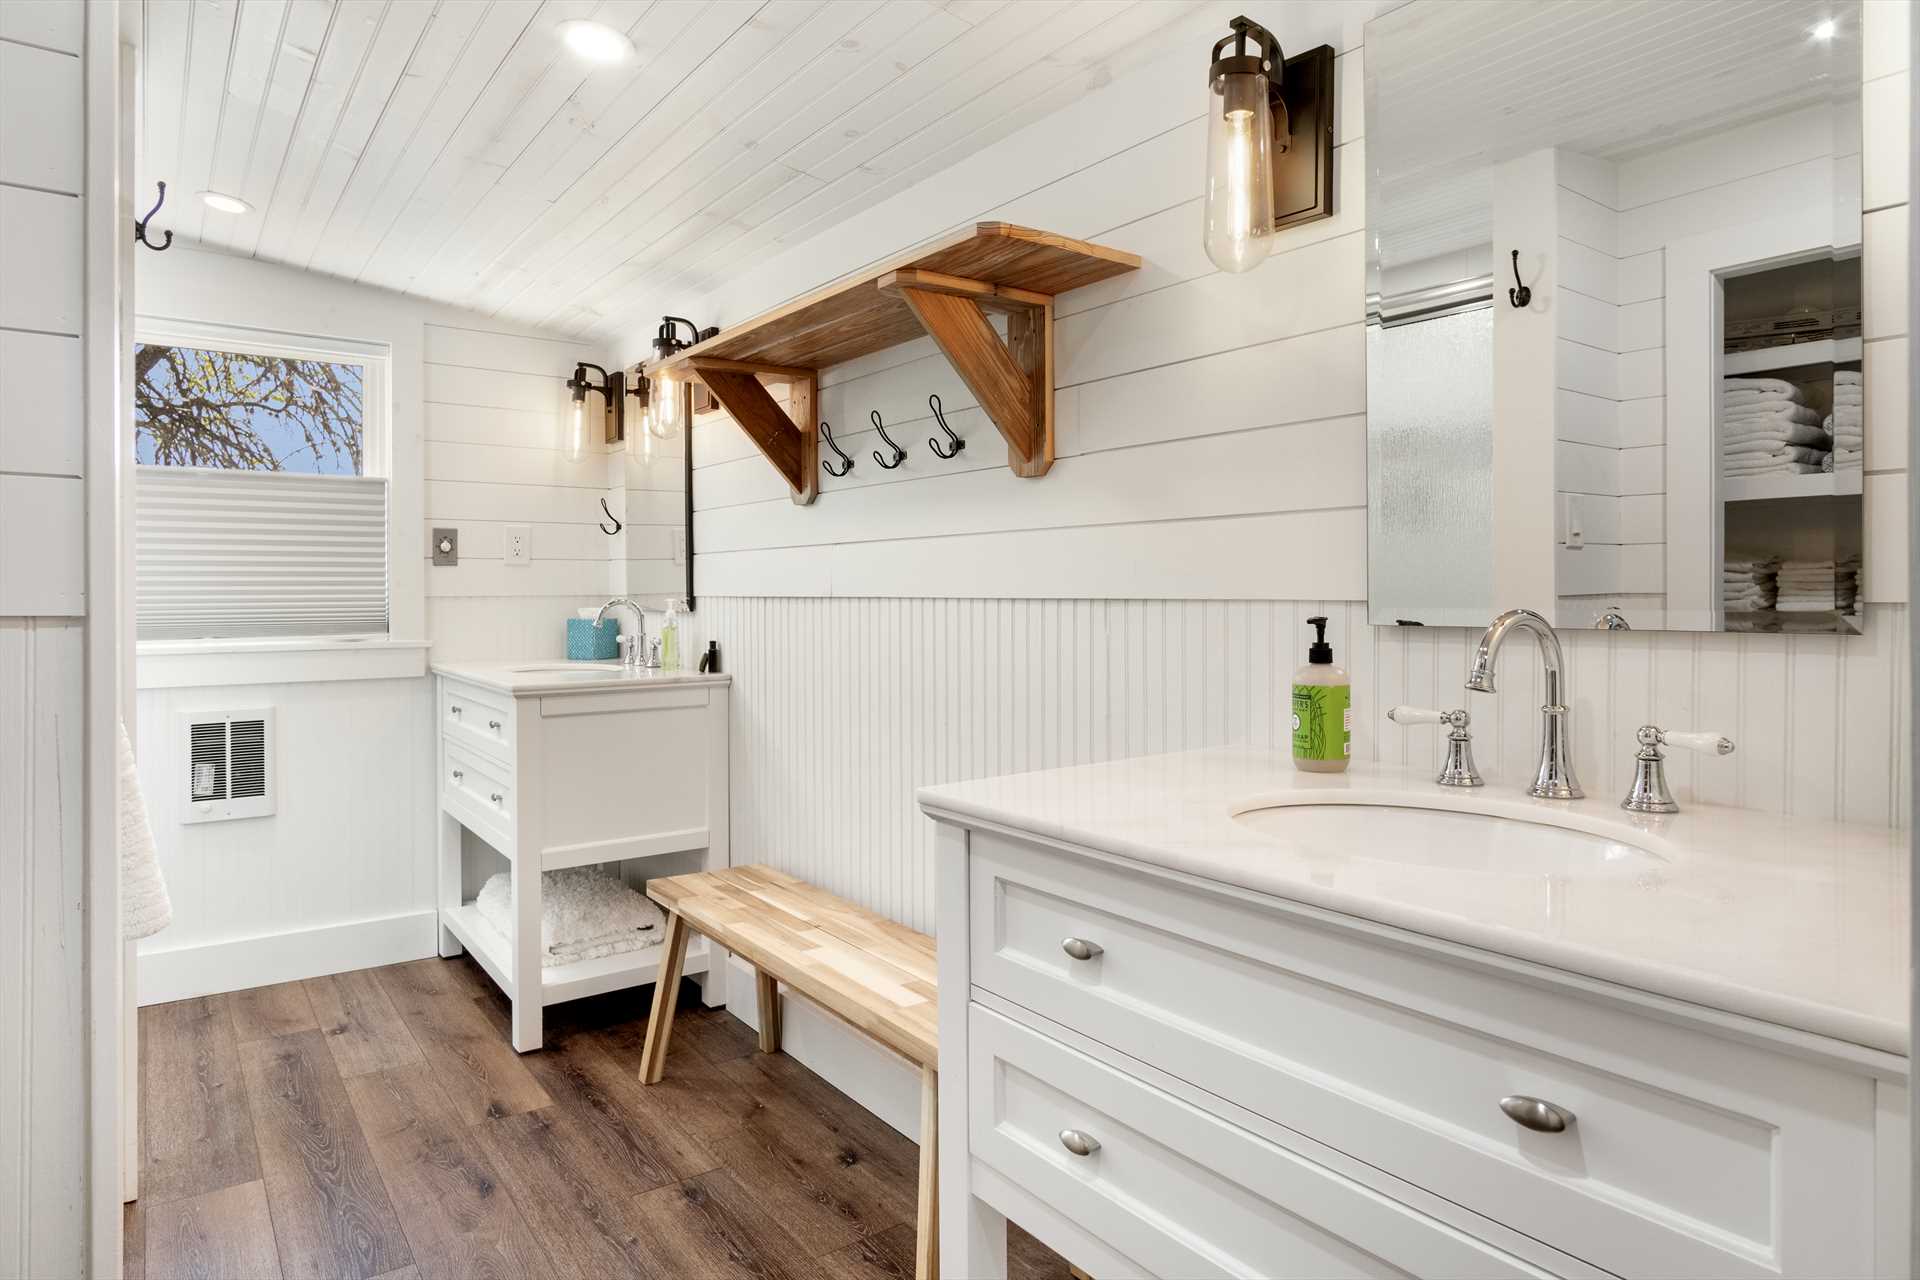                                                 You'll enjoy the full master bath, which includes fresh linens and a dedicated sit-down changing area.